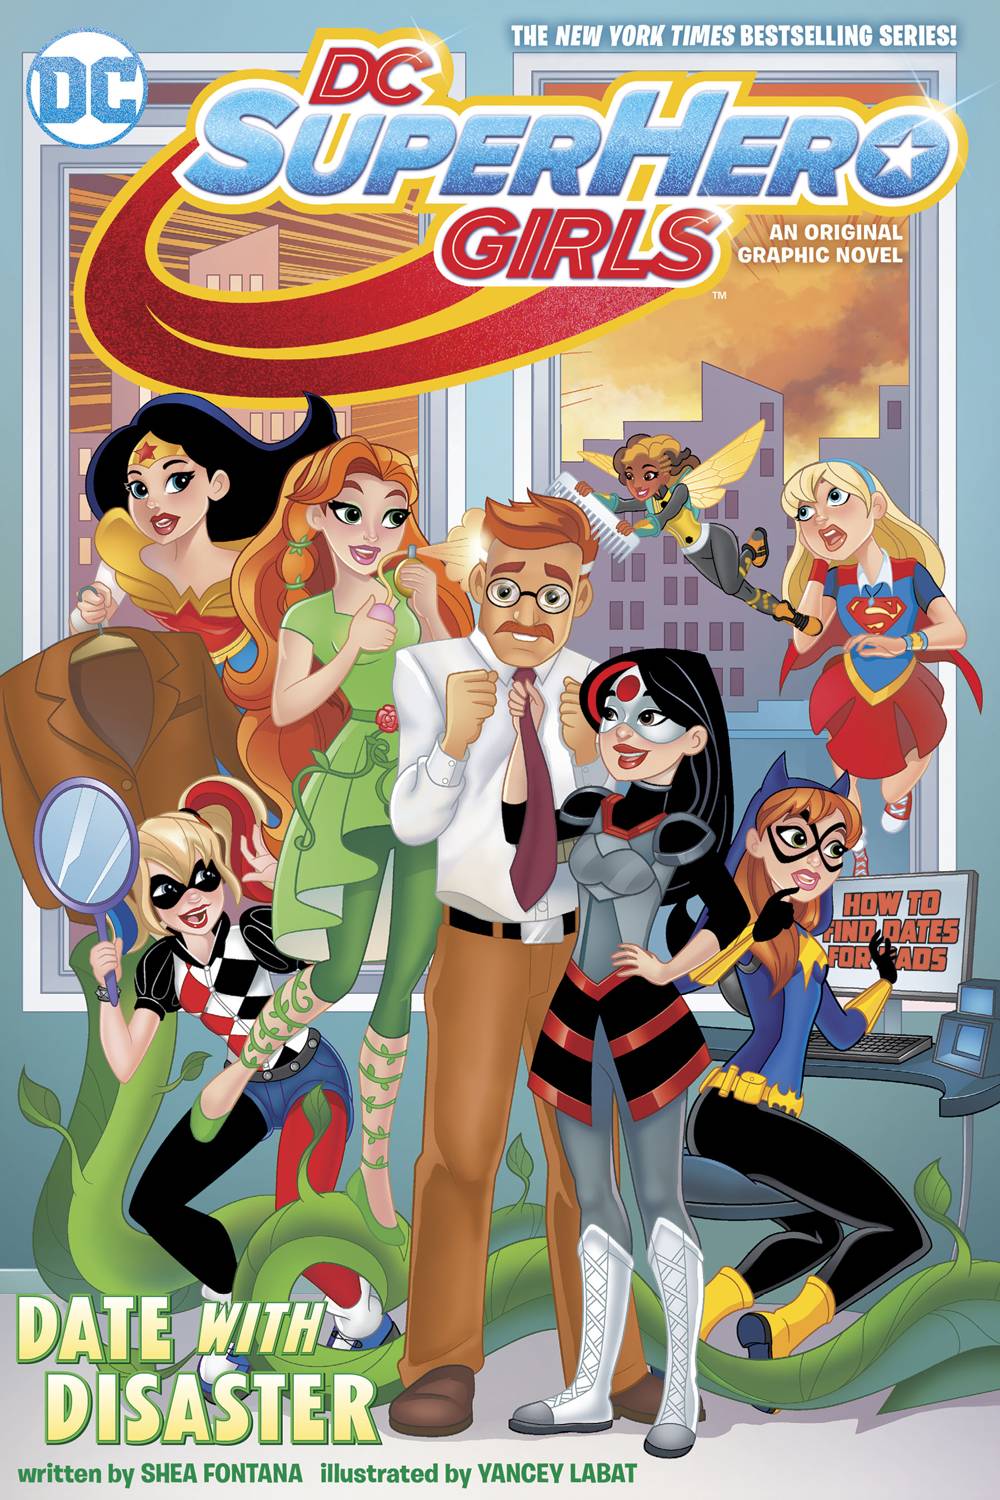 DC SUPER HERO GIRLS DATE WITH DISASTER TP